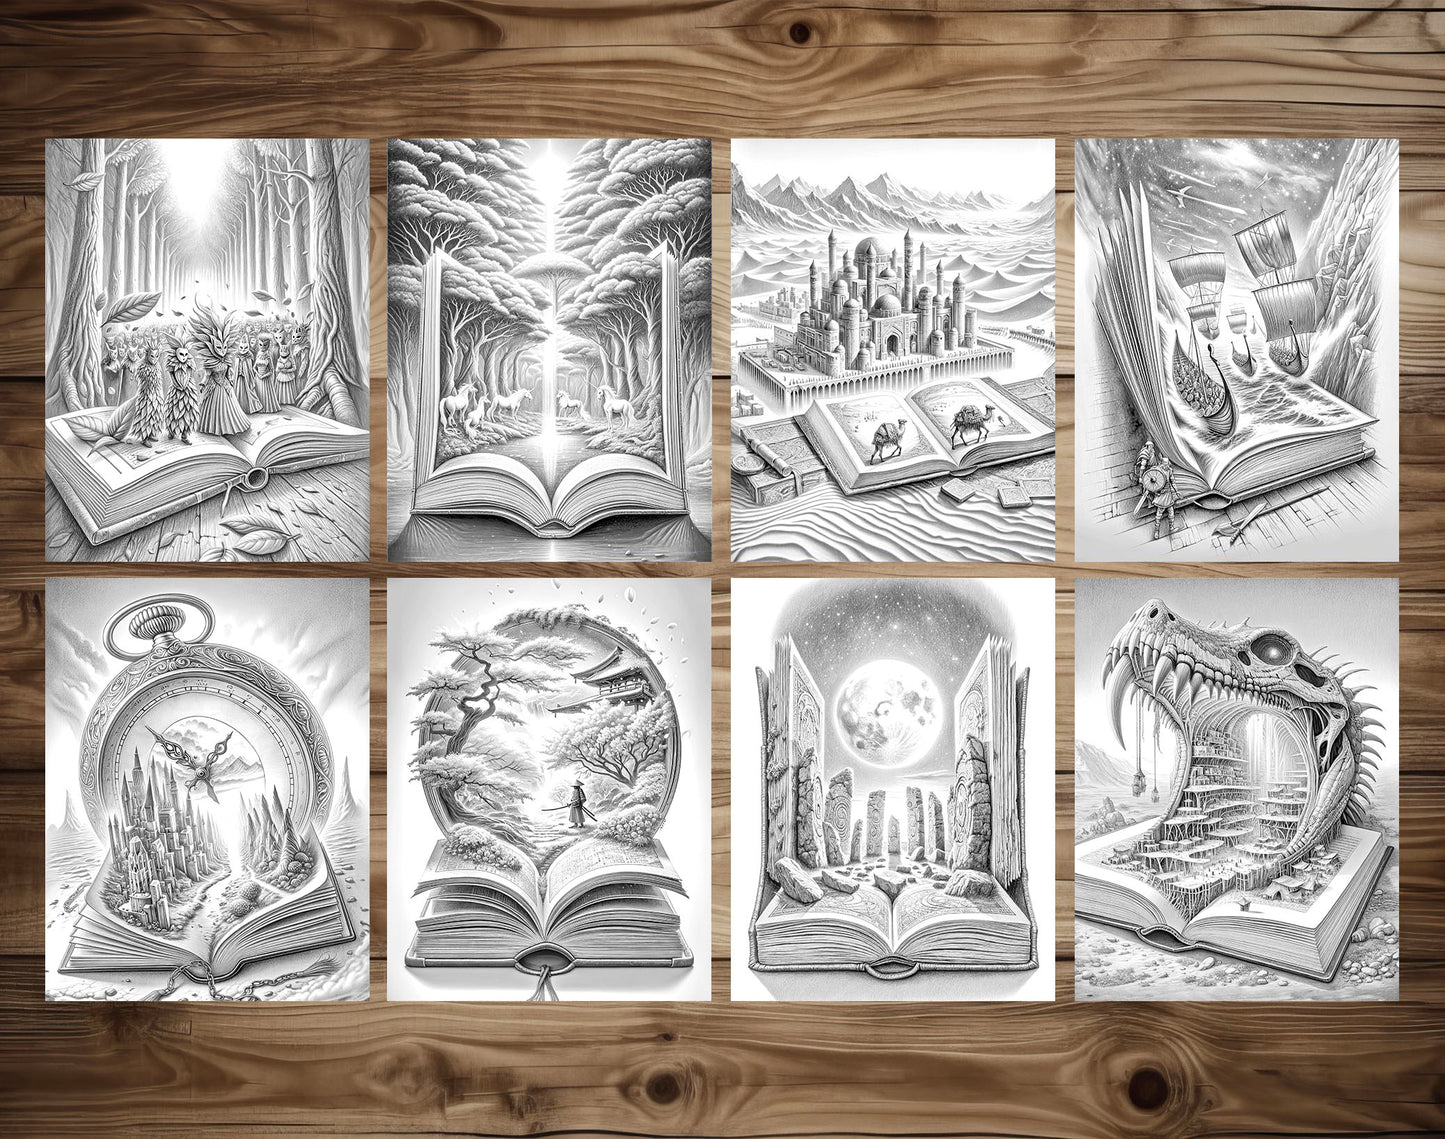 101 Open Magic Book 3 Grayscale Coloring Pages - Instant Download - Printable Dark/Light